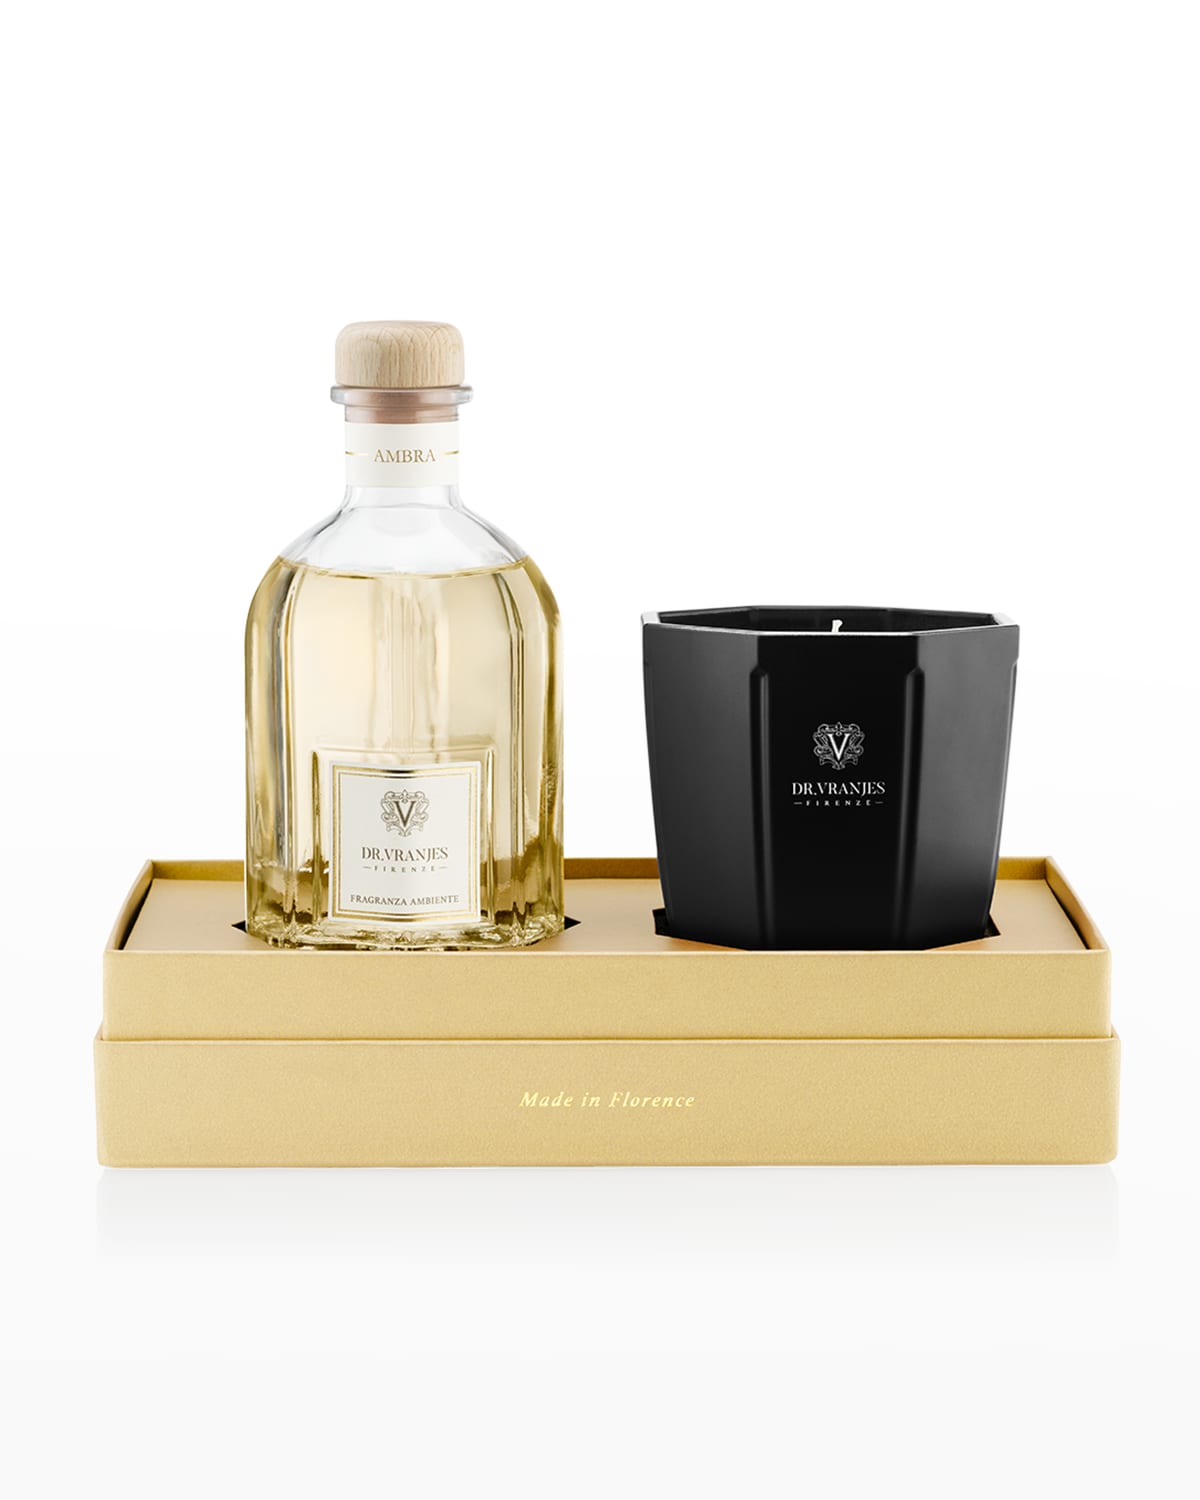 Dr. Vranjes Firenze Ambra Diffuser & Candle Gift Box